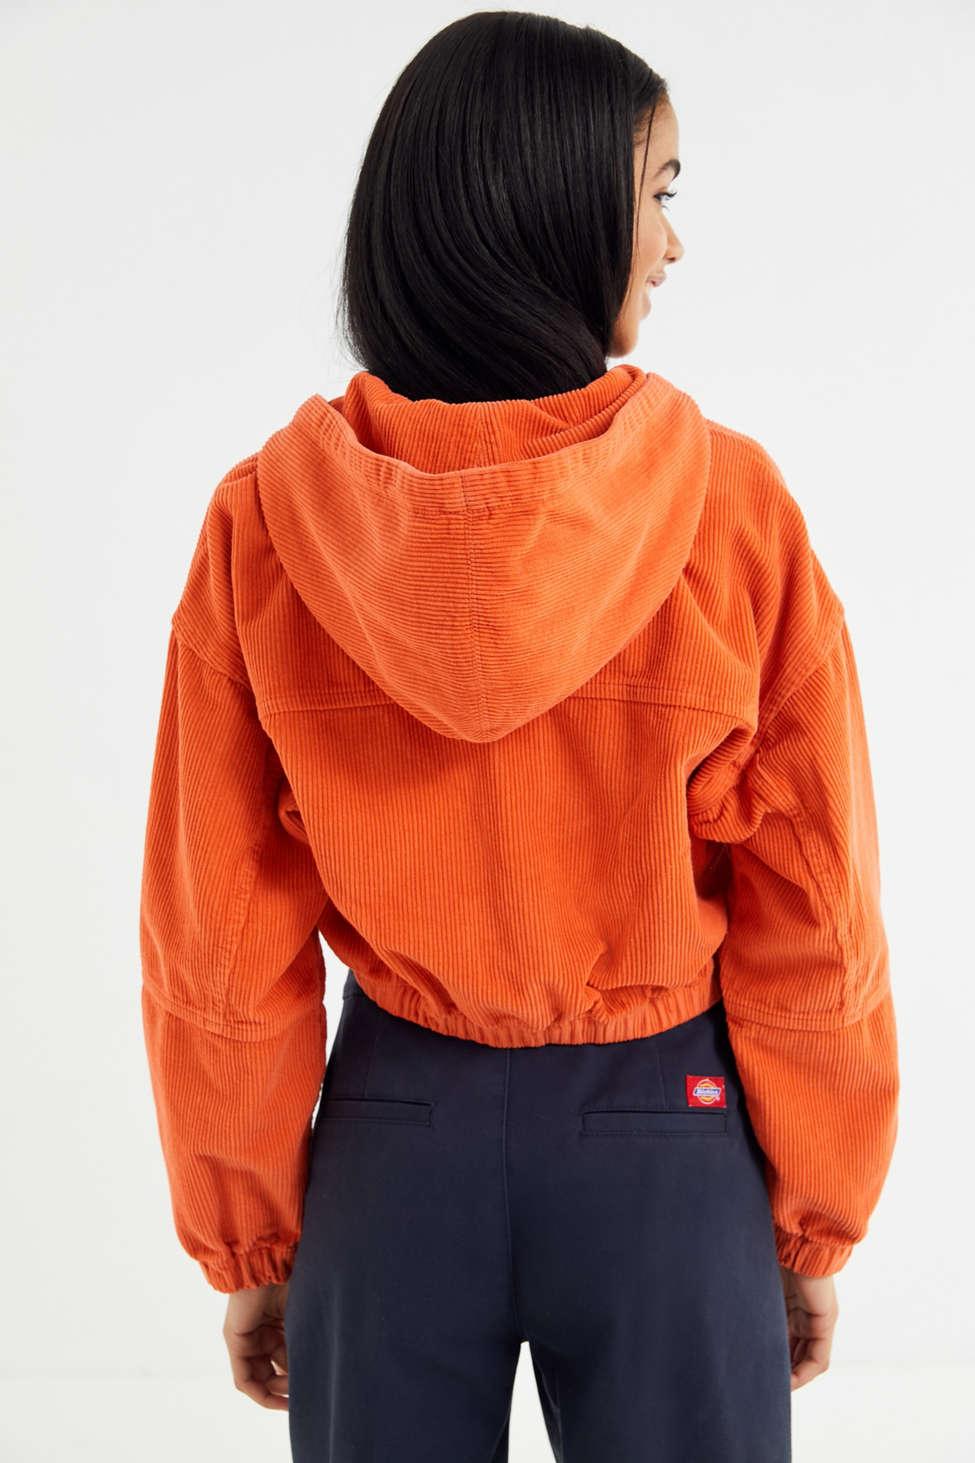 Urban Outfitters Uo Corduroy Hooded Cropped Orange Jacket | Lyst